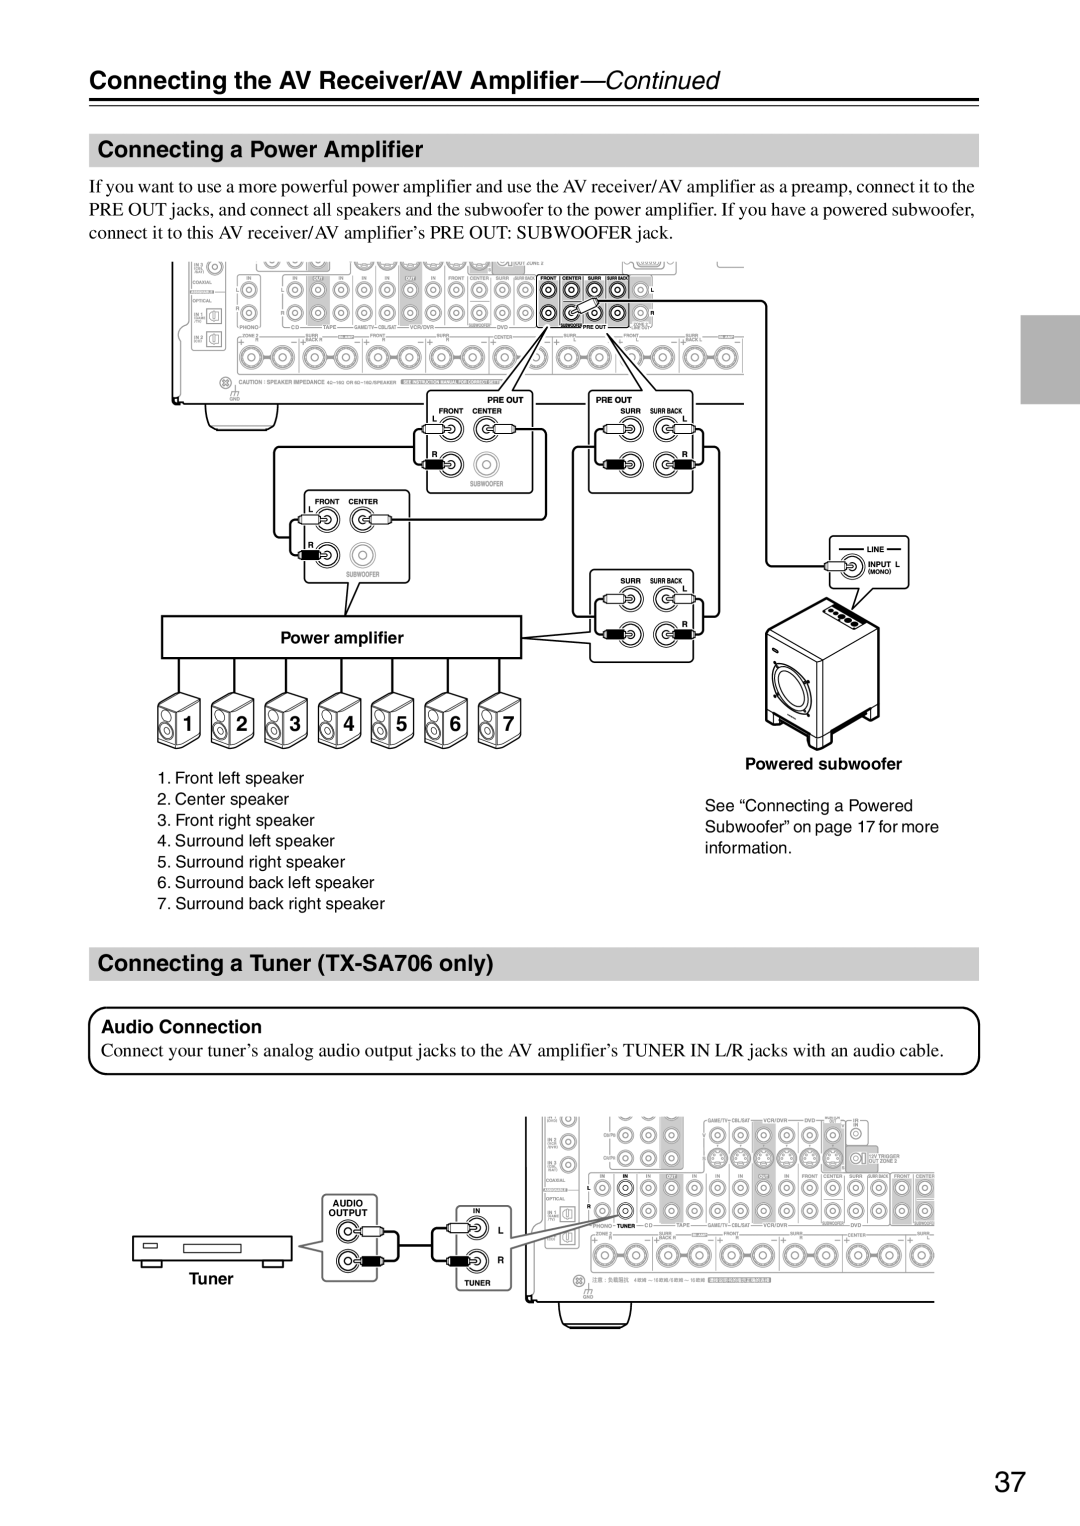 Onkyo instruction manual Connecting a Power Amplifier, Connecting a Tuner TX-SA706only, 1 2 3 4 5 6, Audio Connection 